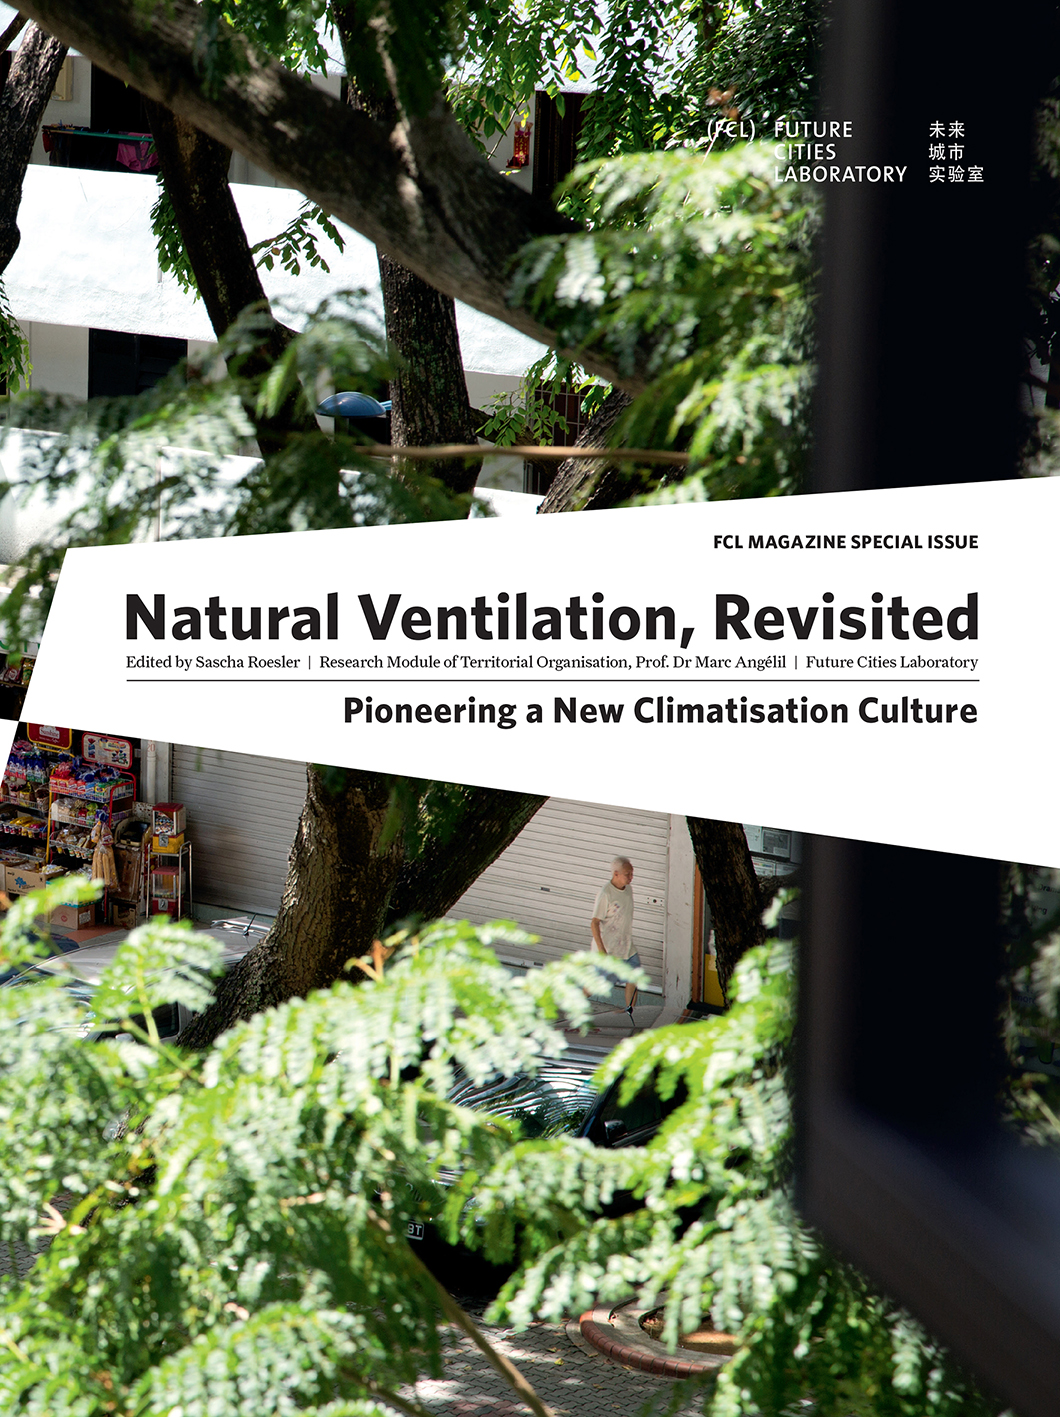 Special Issue on “Natural Ventilation” in Southeast Asia, edited by Sascha Roesler. 